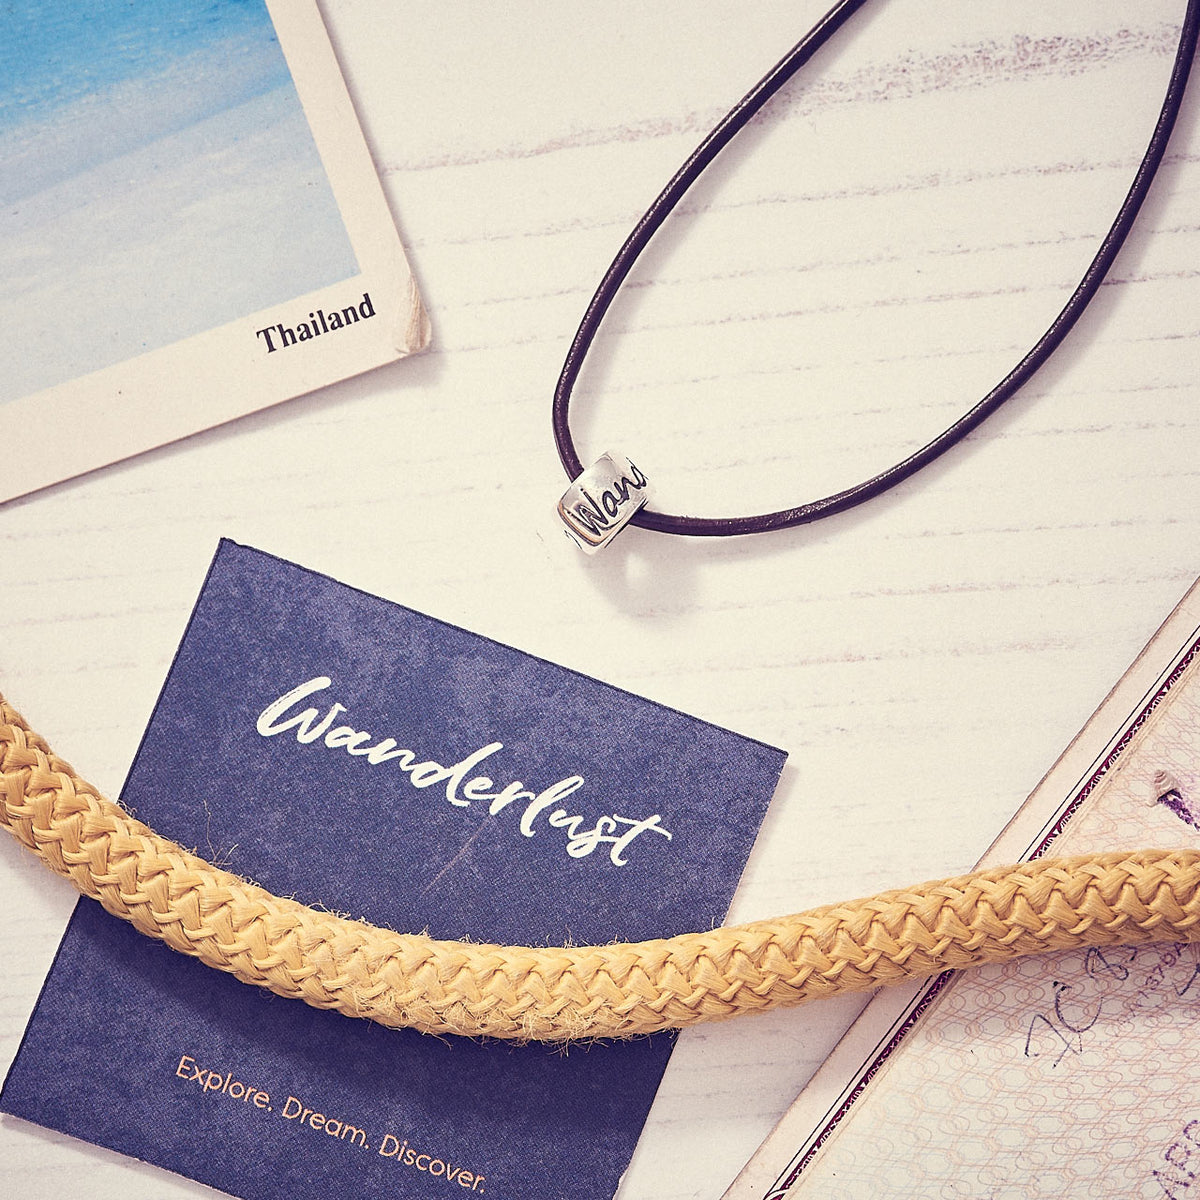 Original wanderlust gift, necklace for a man or woman makes a nice travel gift